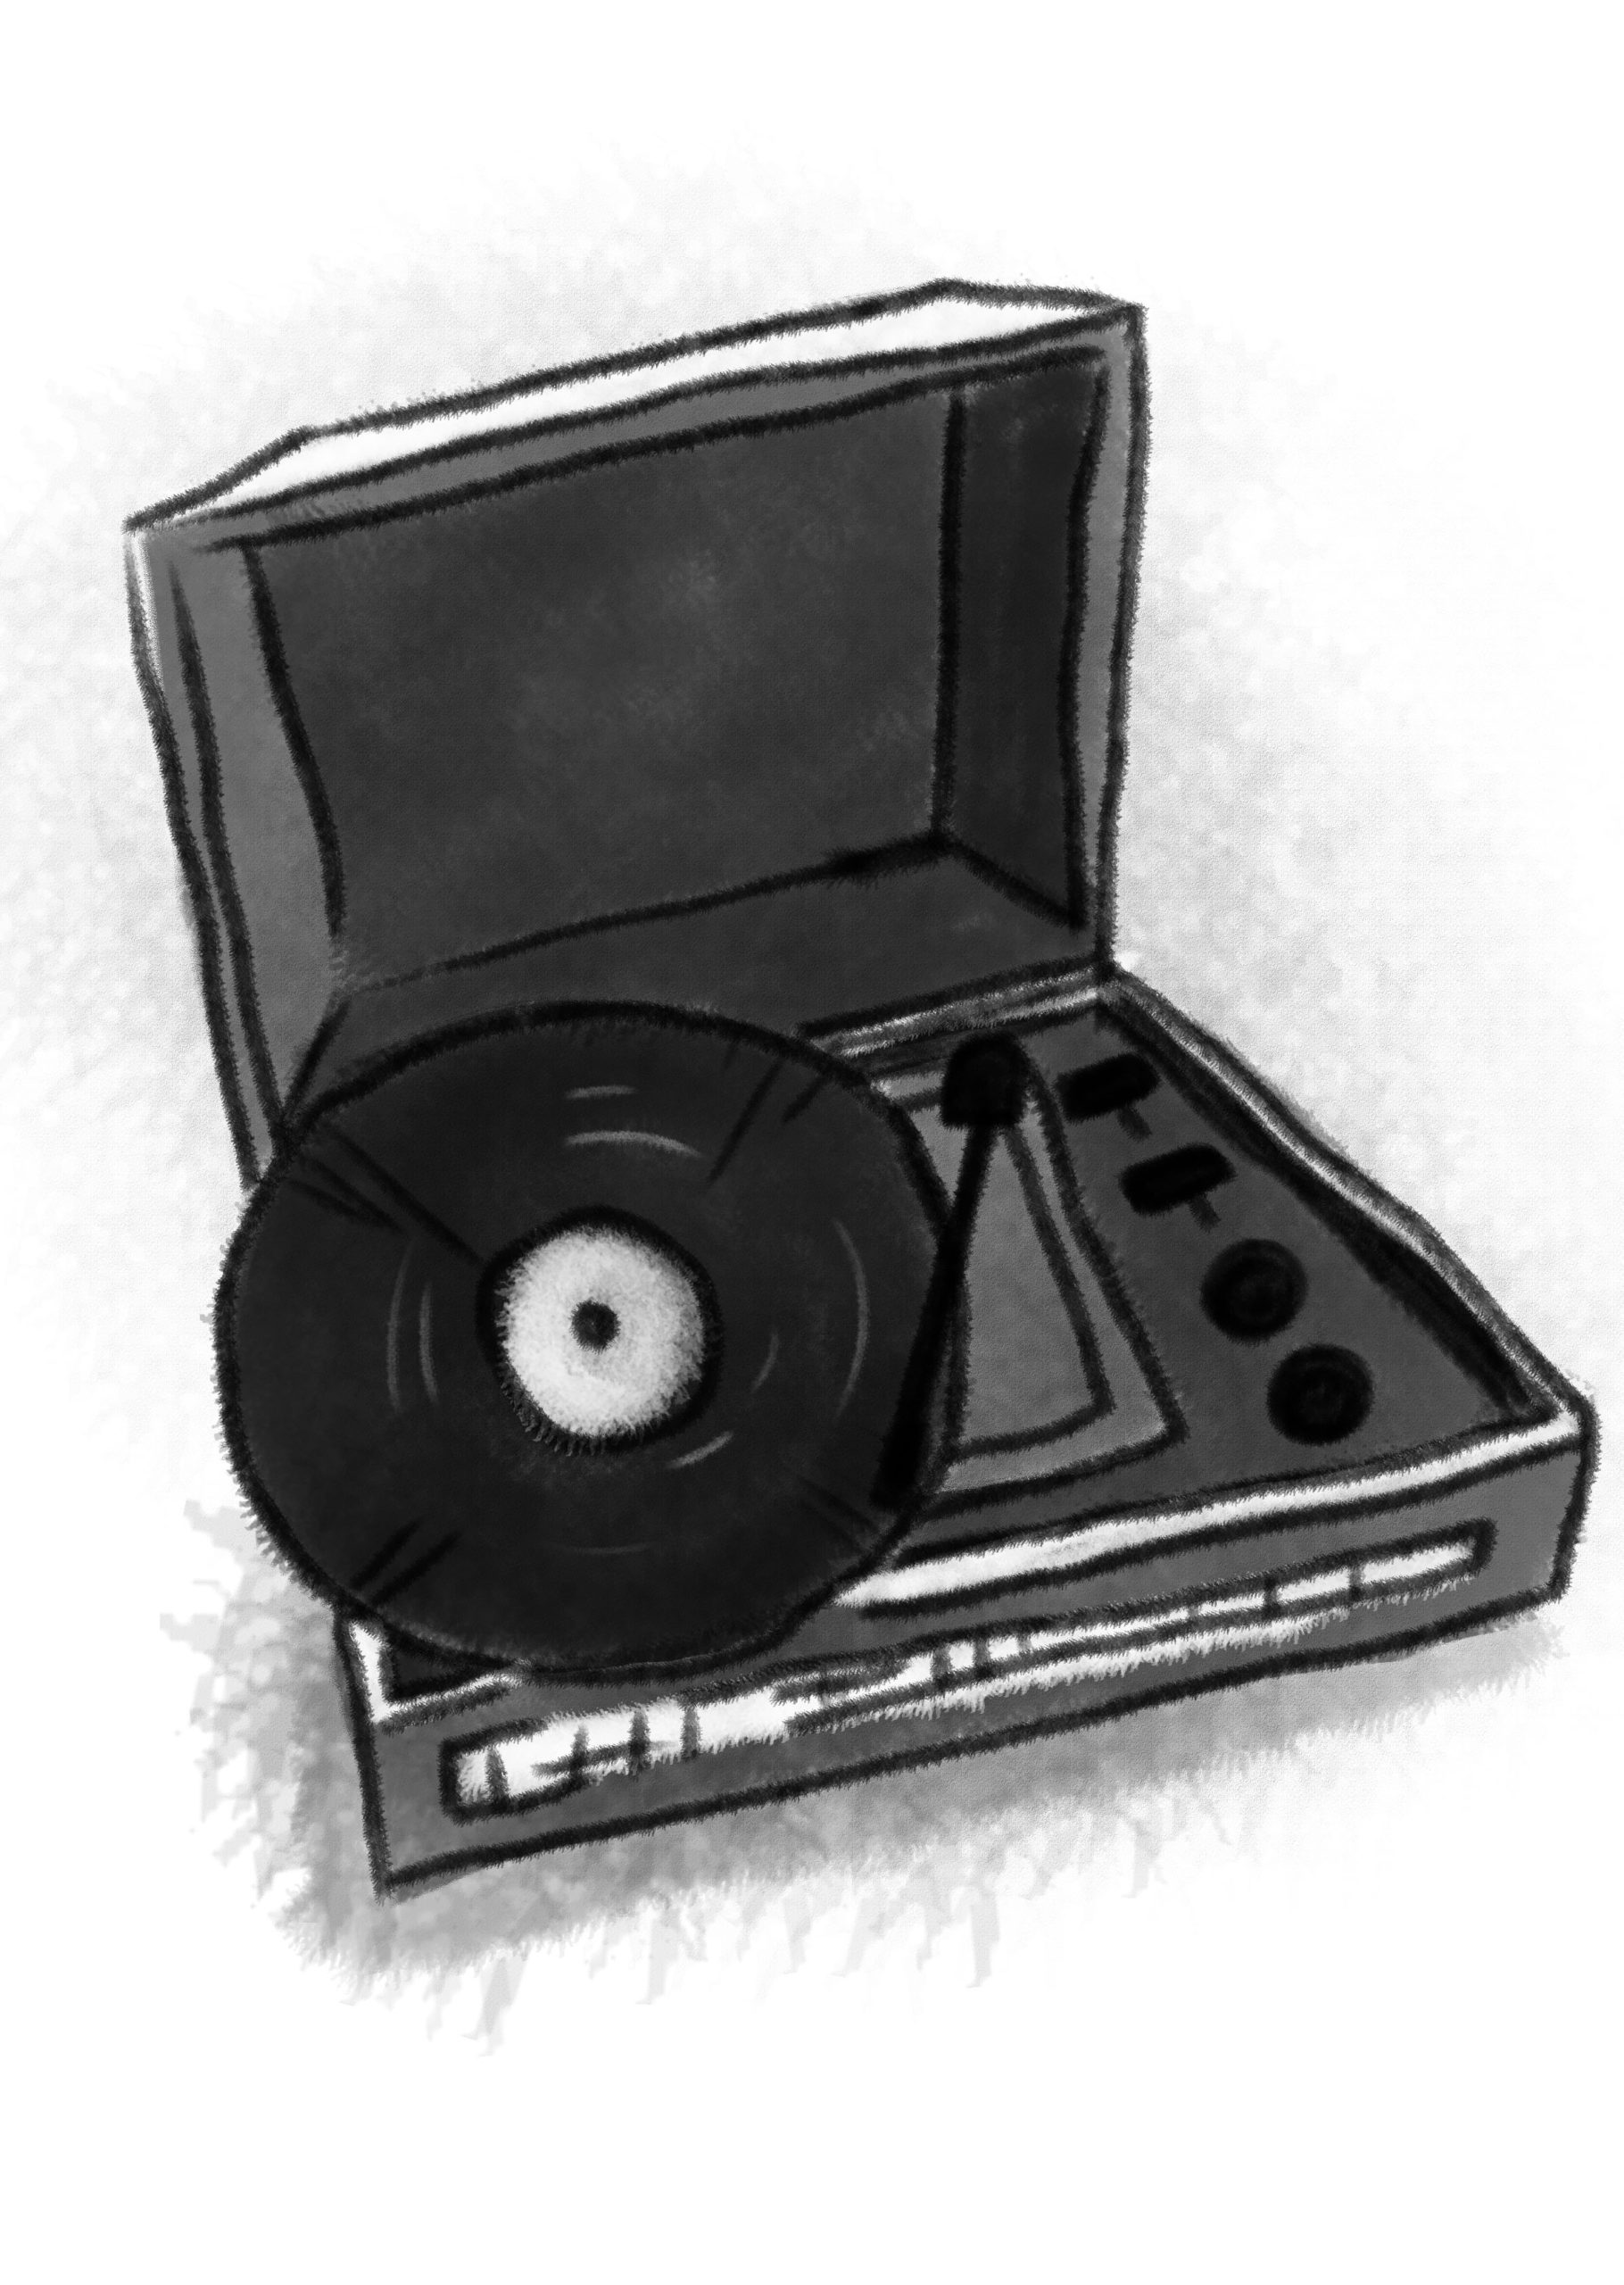 A record player. 